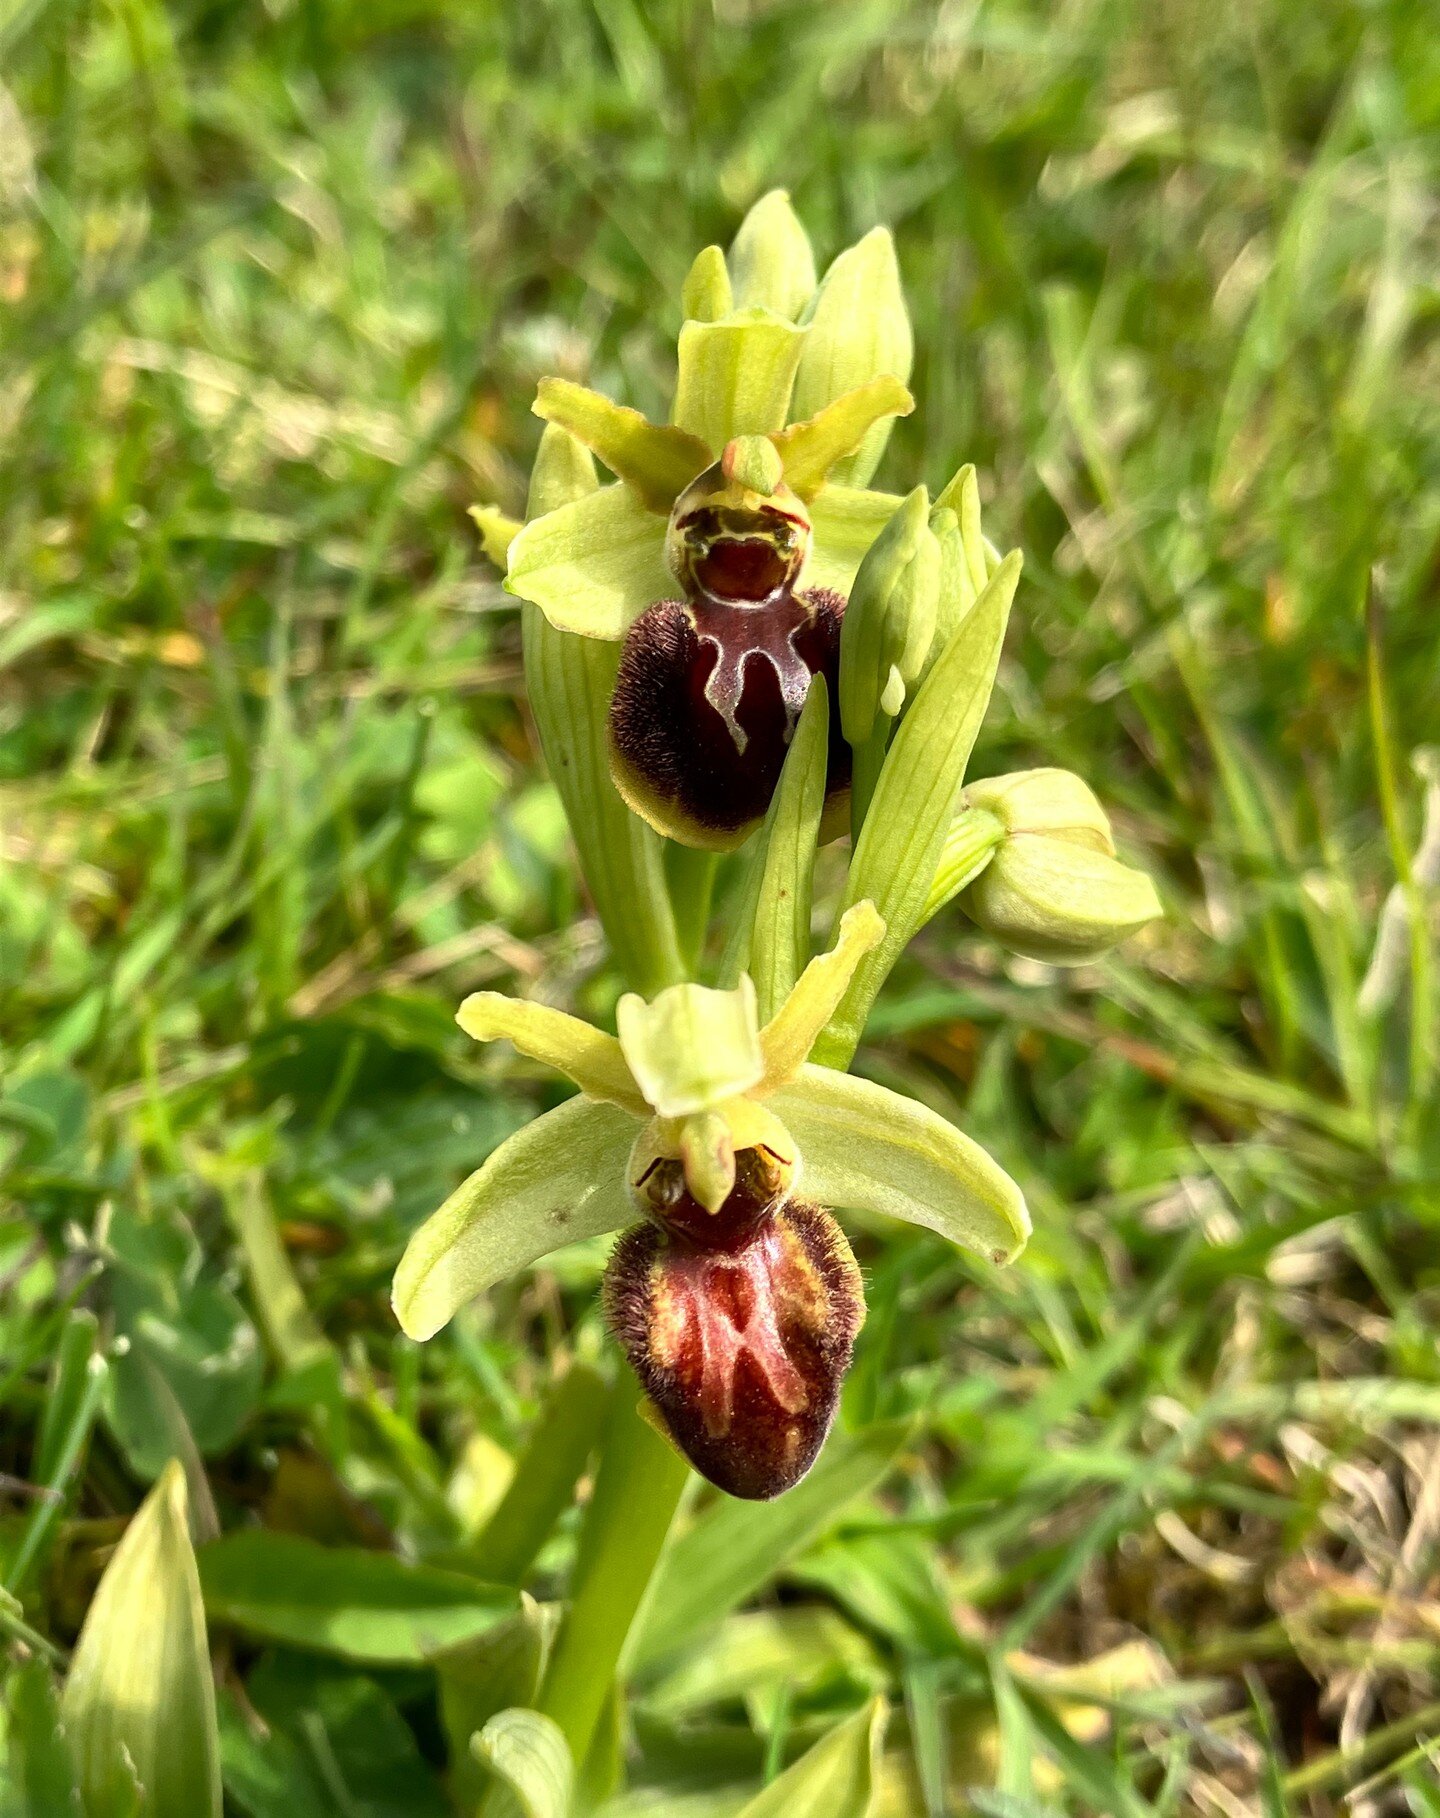 Yesterday,@paullawston and I hiked more than 12 miles in South Downs and had the pleasure of discovering several Early Spider Orchids and Early Purple Orchids during the first UK orchid walk of 2023. 

It was a truly enchanting experience, even if I 